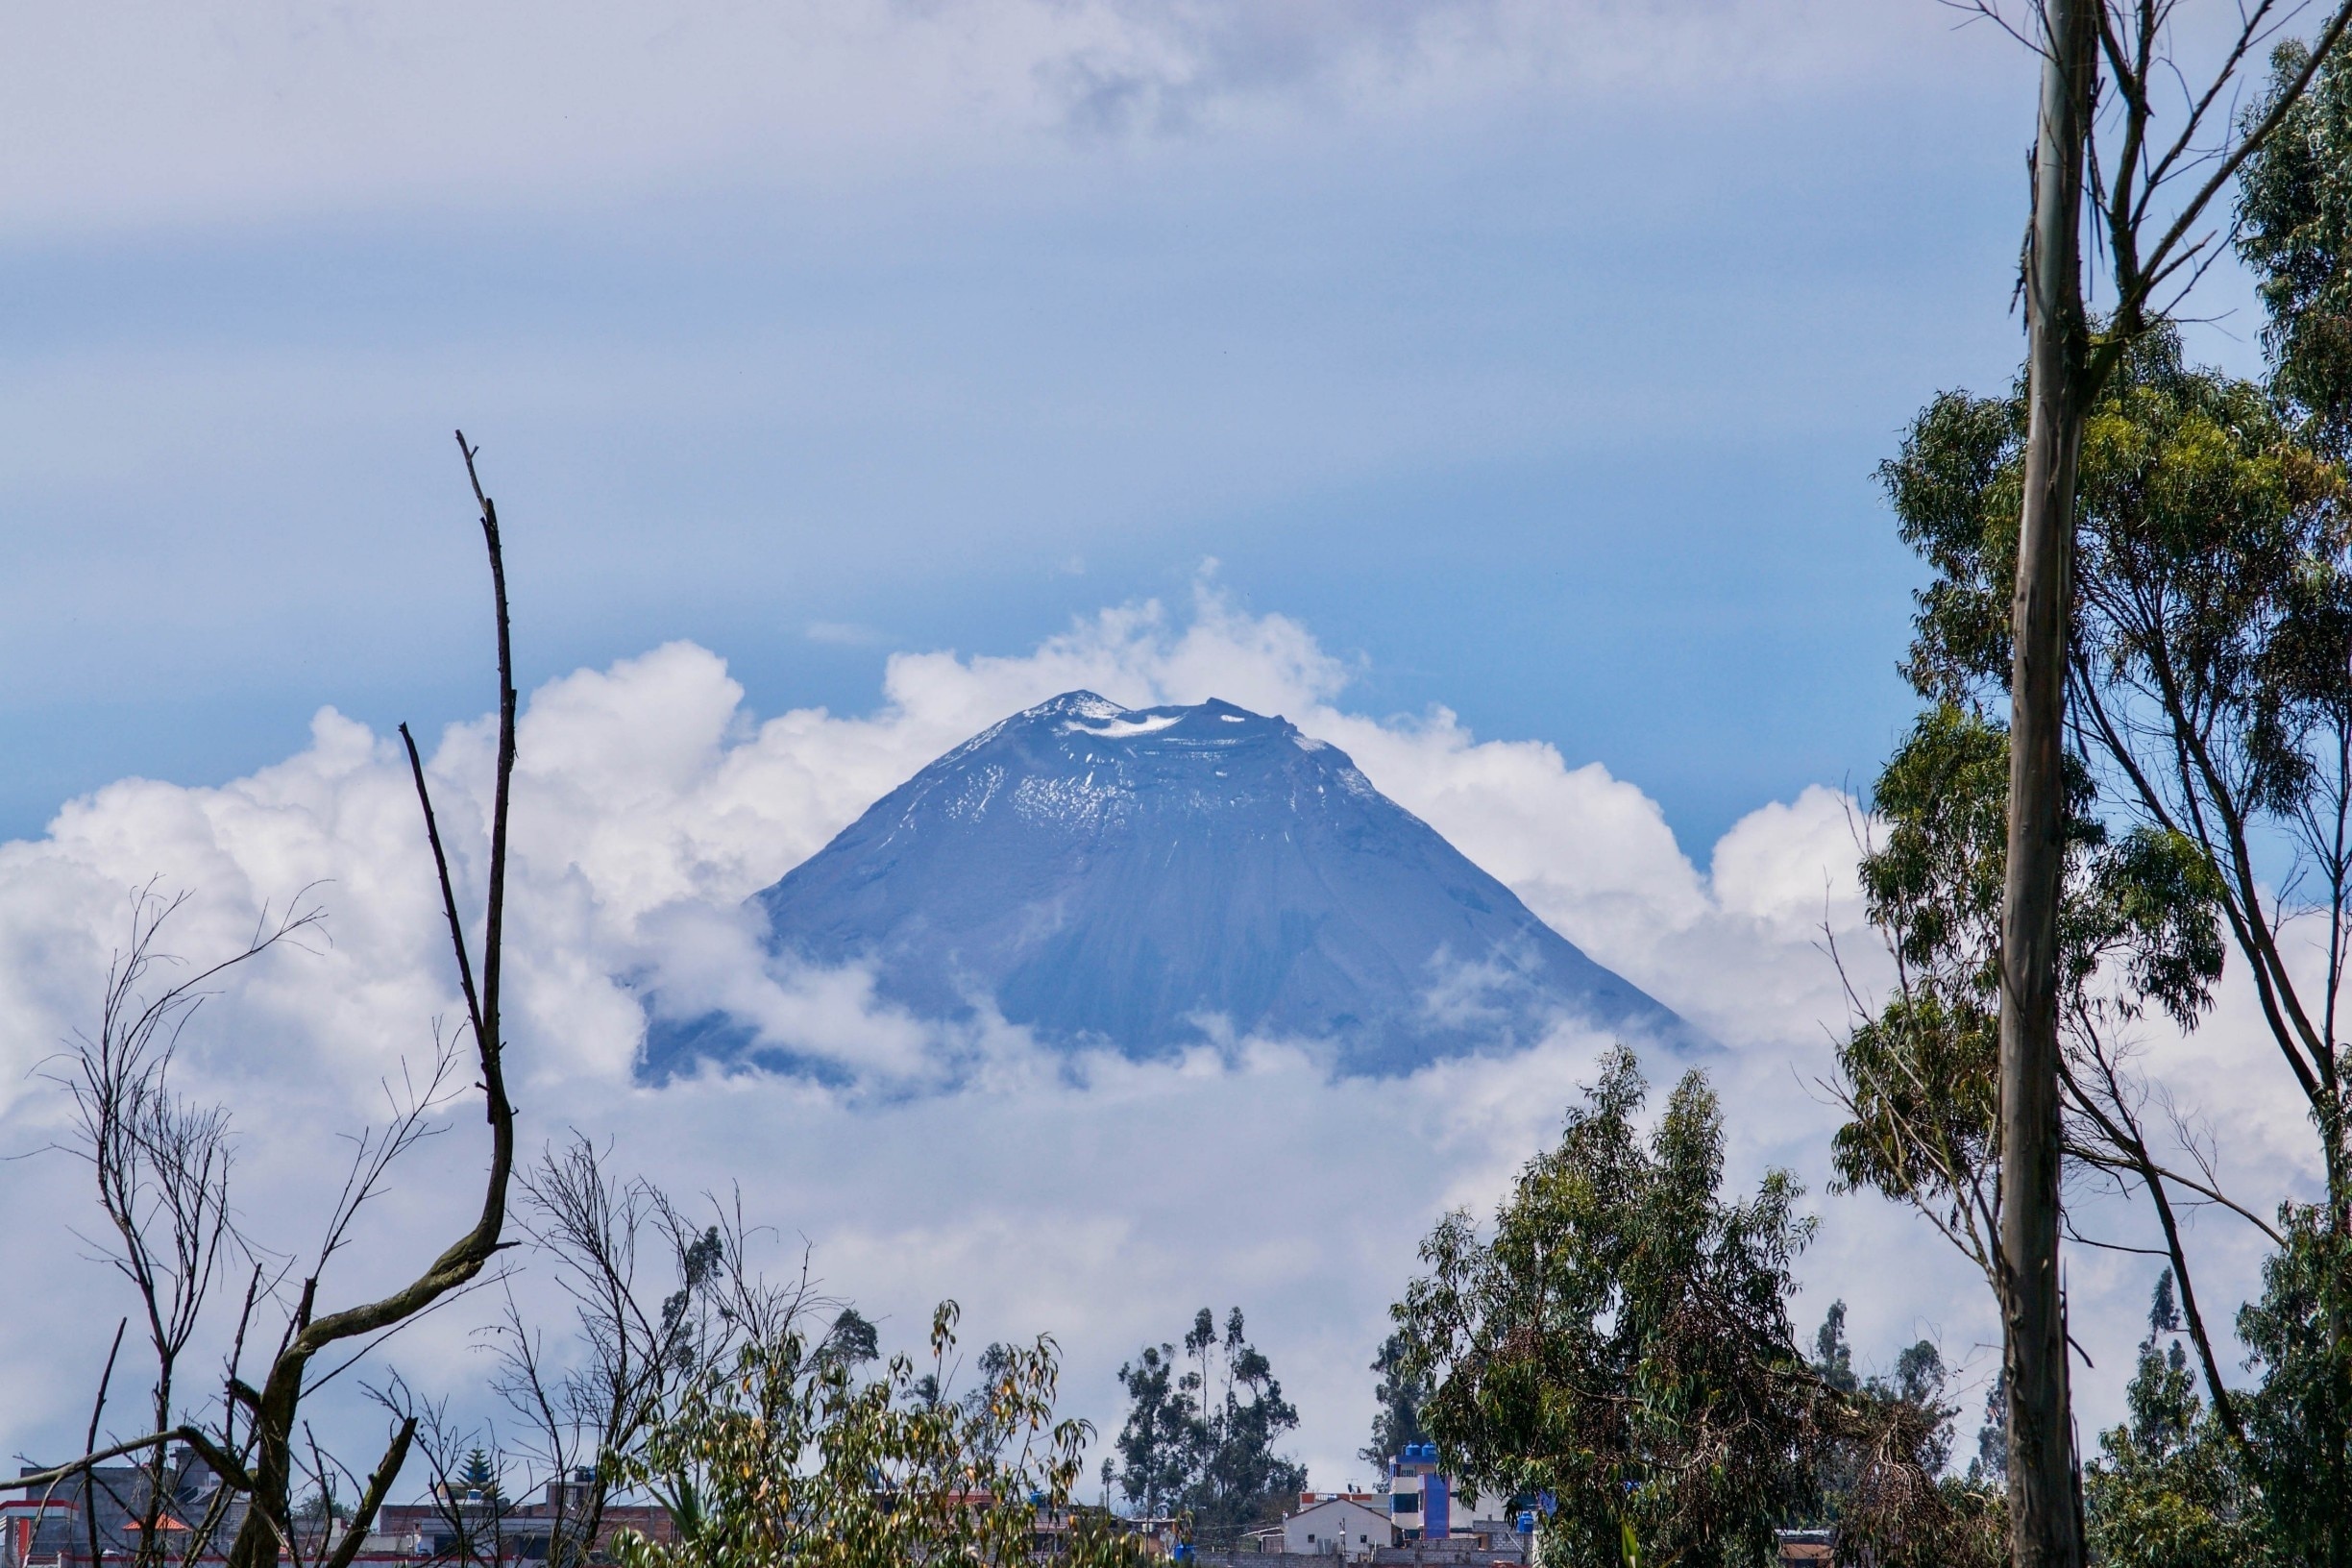 Tungurahura is an impressive volcano in the high altitude town of Banos, Ecuador. We were very lucky to be able to see "the mountain out" as we Seattleites call Mt. Rainier.

More on Banos here: https://culturalfoodies.com/2017/11/02/top-ten-things-to-do-in-the-adventure-town-of-banos-ecuador/

#banos #volcano #tungurahura #ecuador #travel #Culture